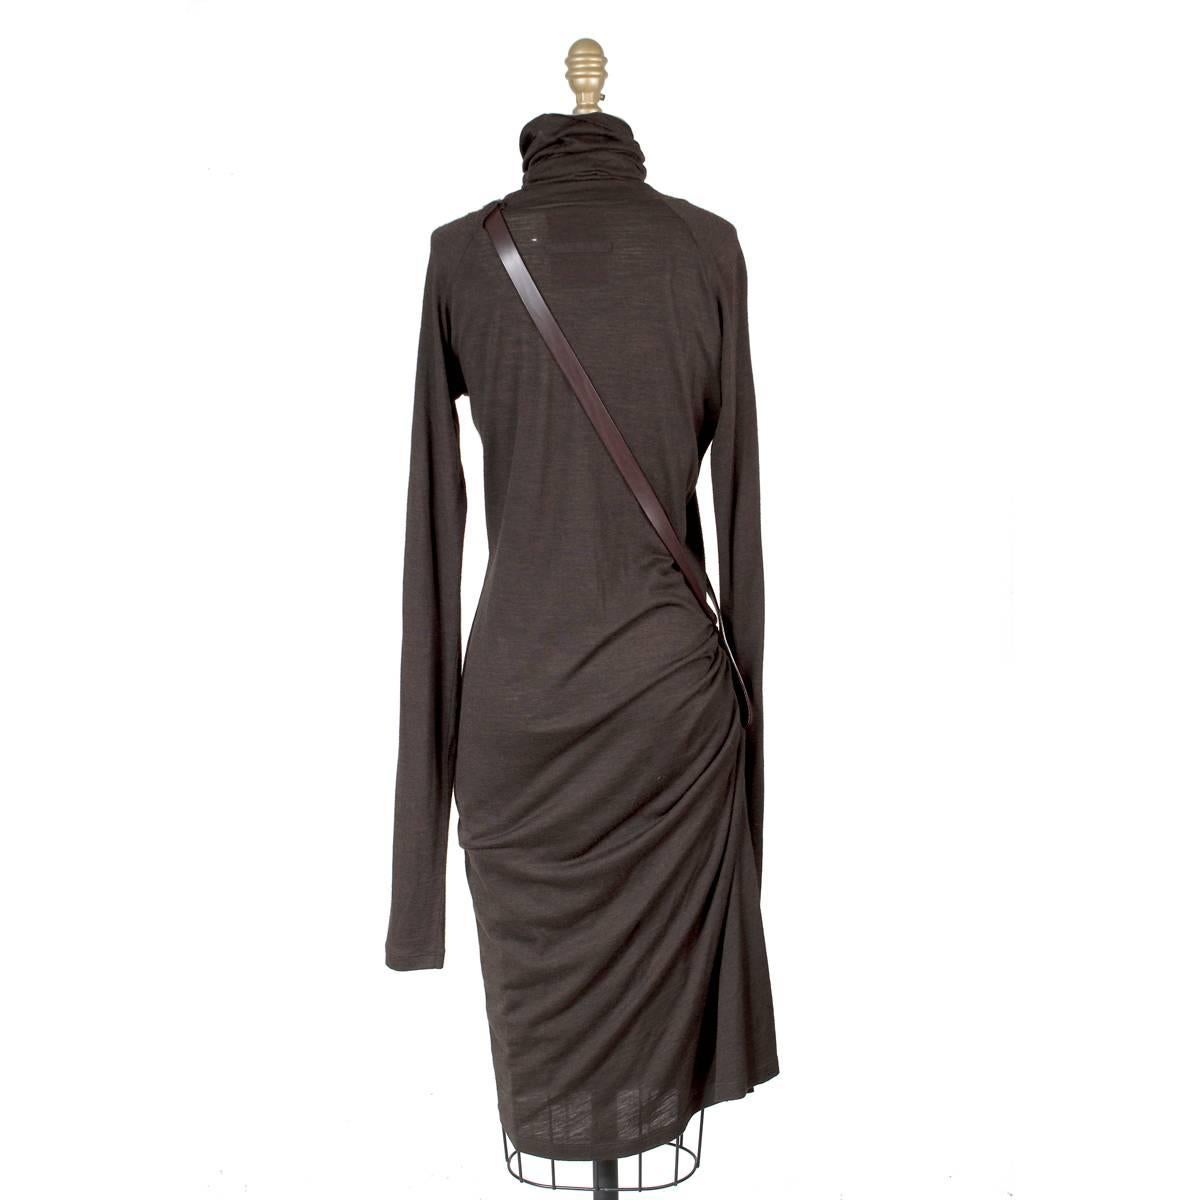 This is a long sleeve turtleneck tee dress by Jean Paul Gaultier.  It is made from a thin stretch cotton and features a leather strap attached to the side that goes over the shoulder.  It also has a side slit.